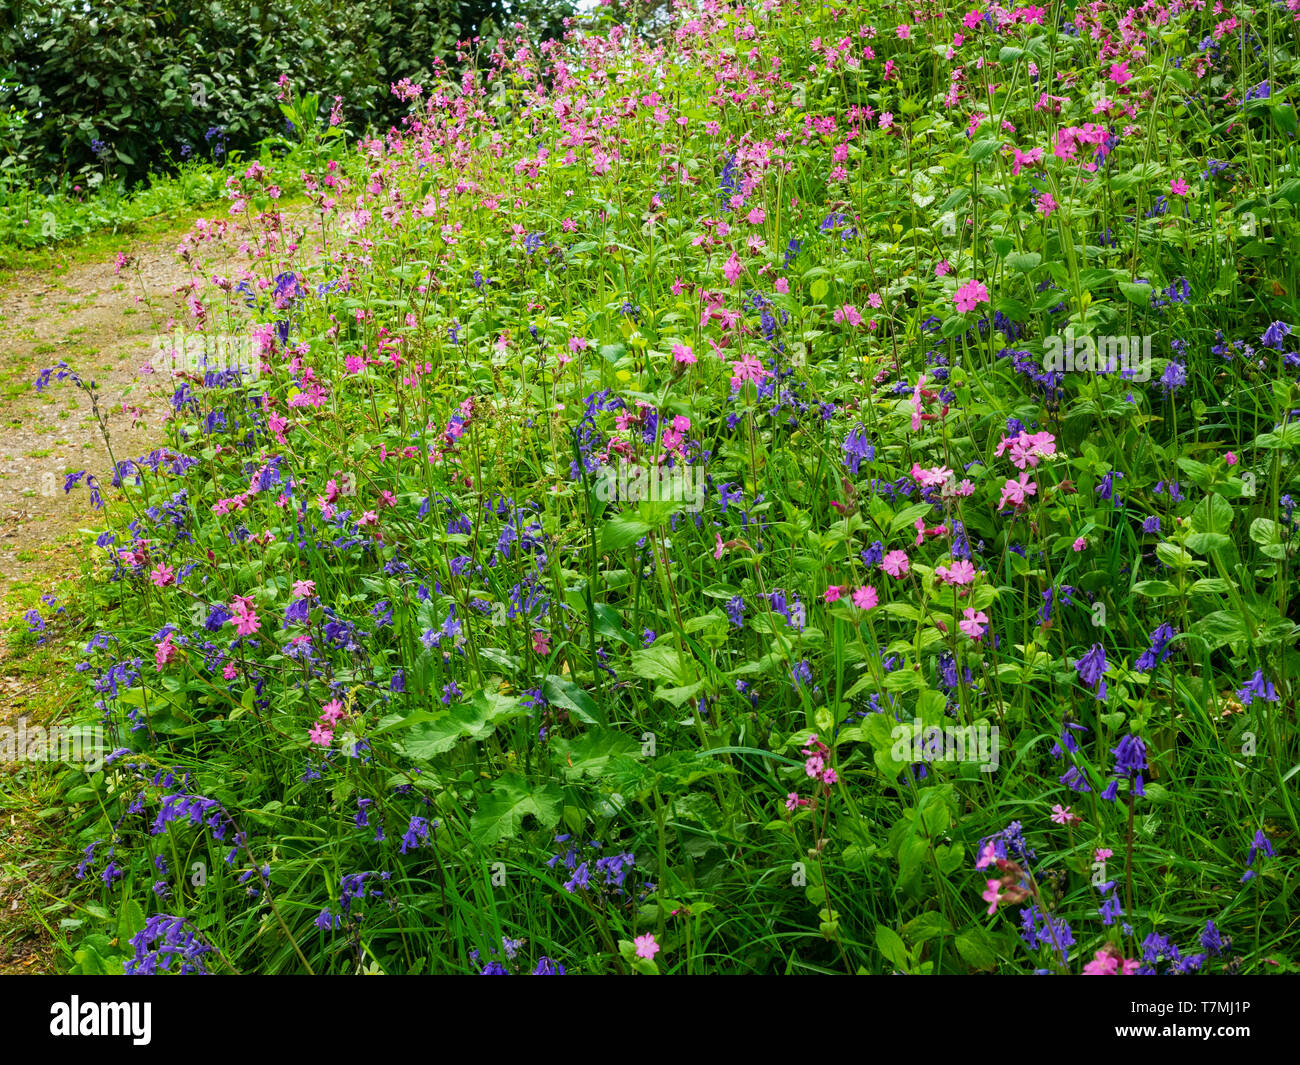 Spring wildflowers, principally bluebells, Hyacinthus non-scriptus, and red campion, Silene dioica, on a Devon woodland bank Stock Photo